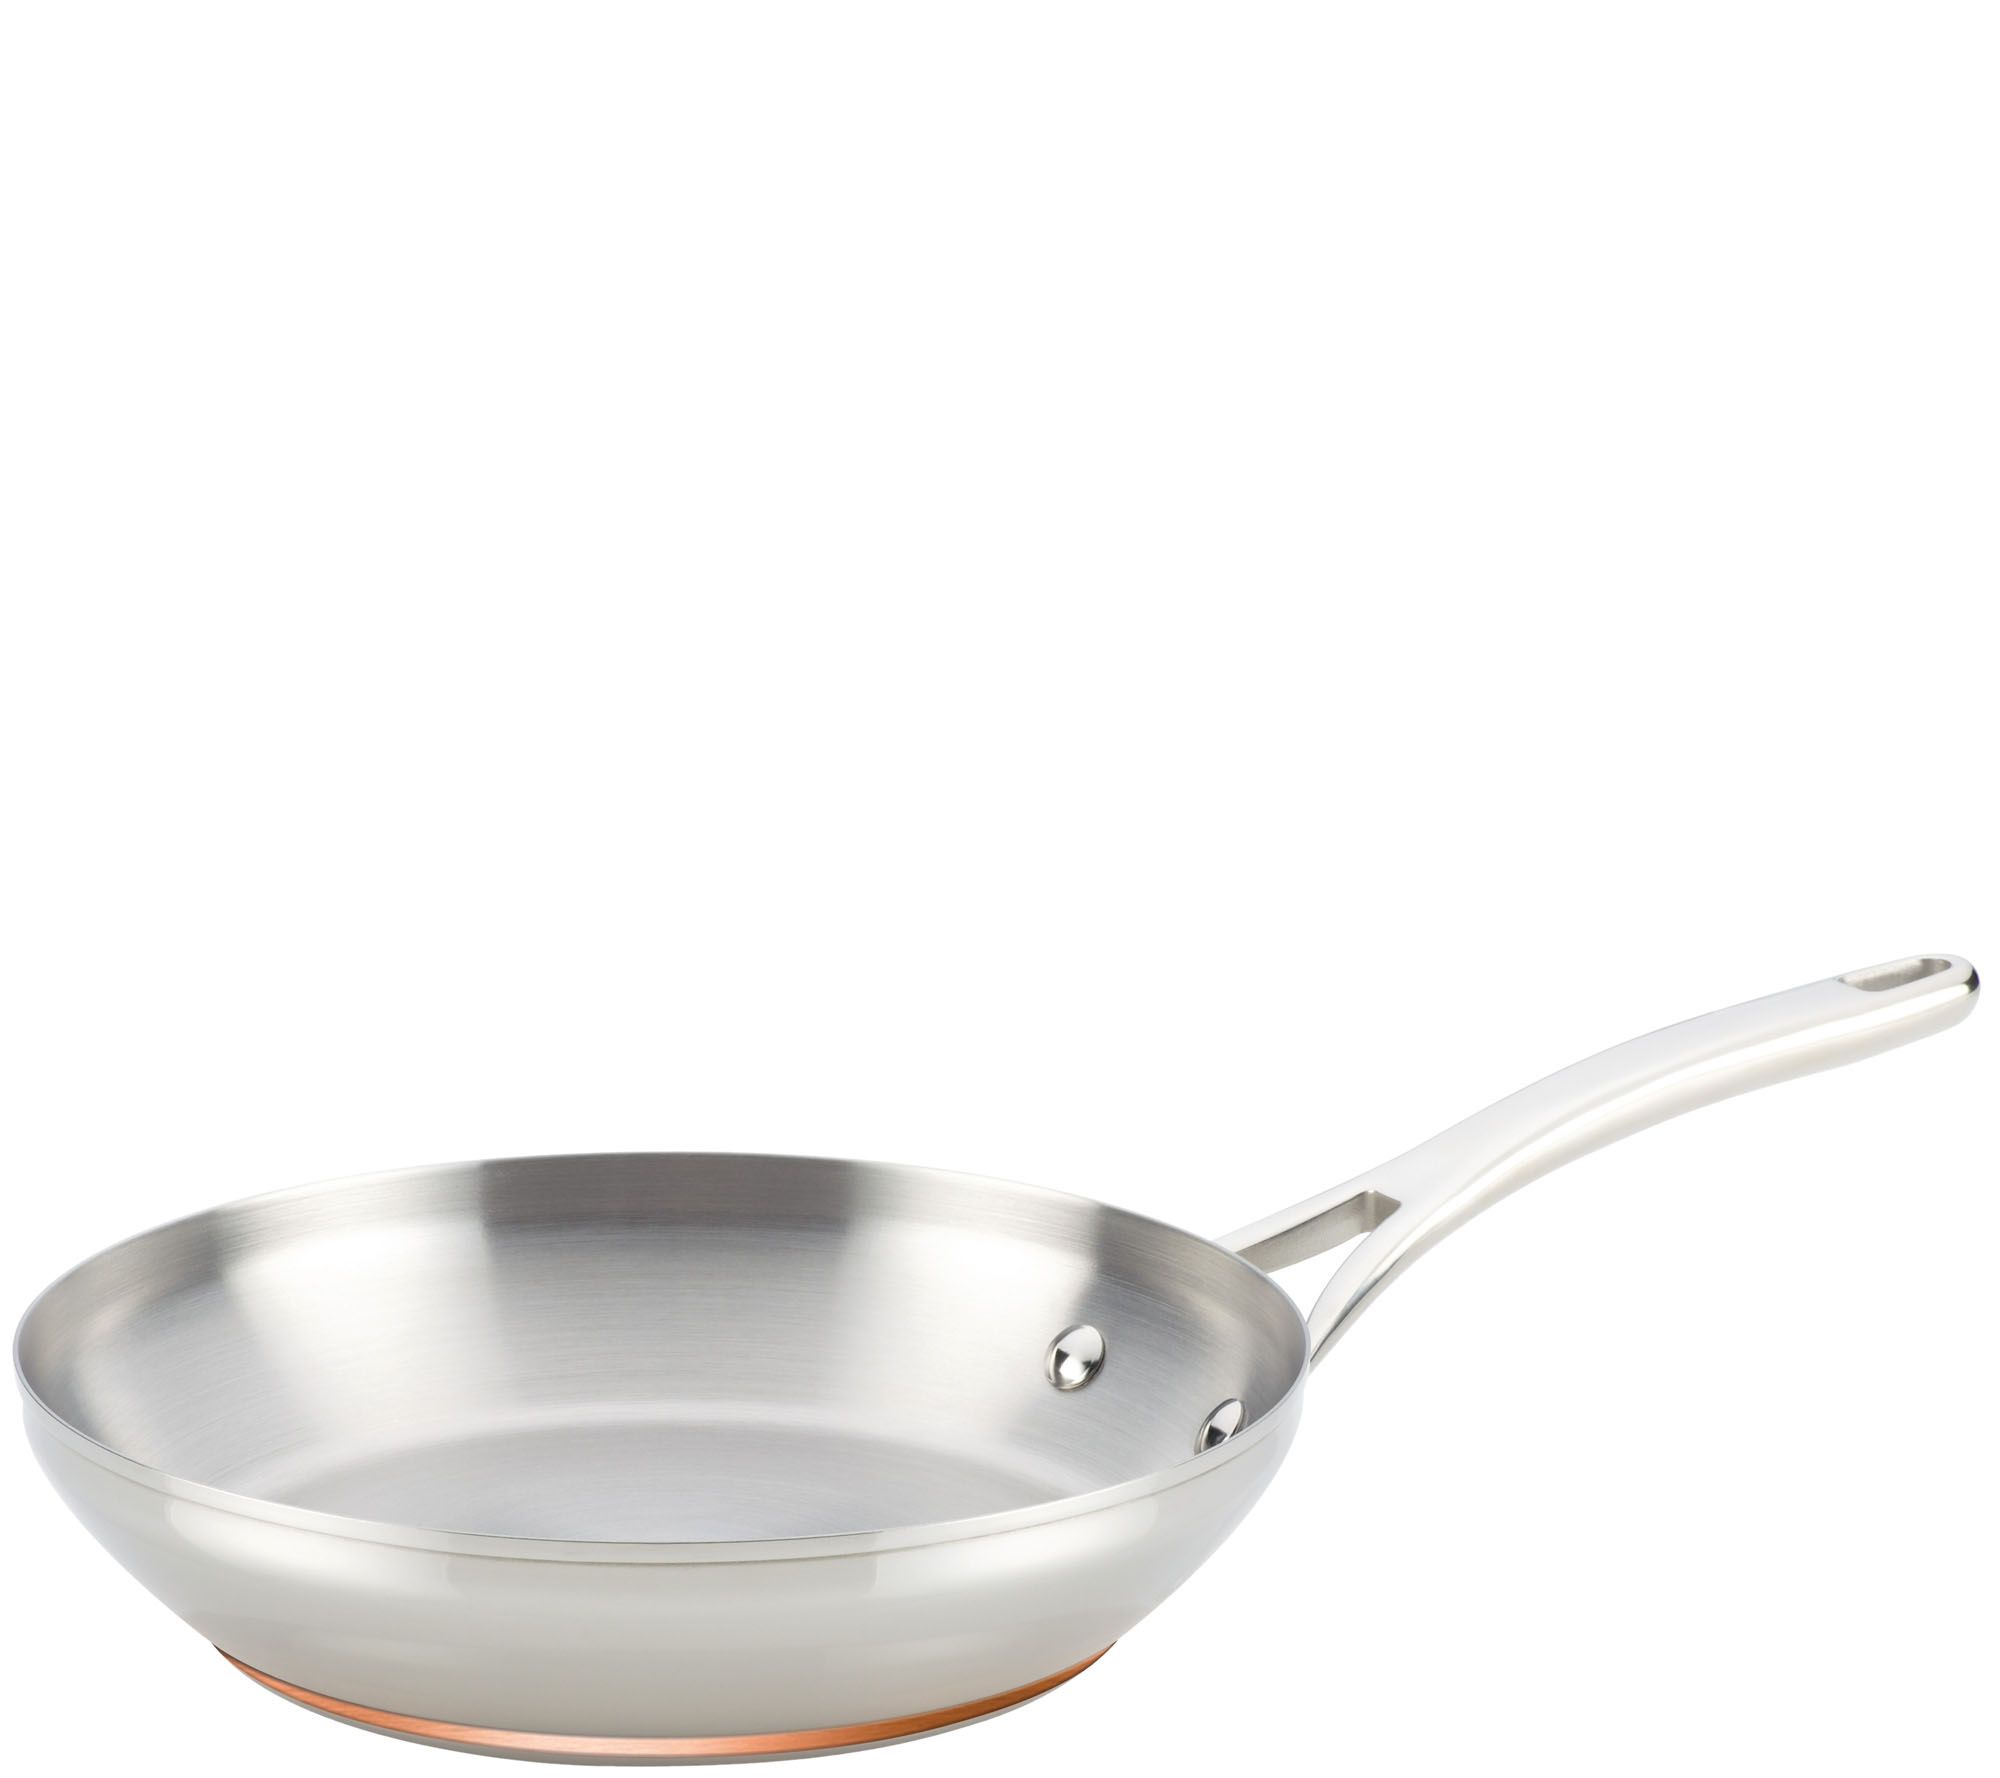 Anolon Nouvelle Copper Stainless Steel 12 In. Covered French Skillet, Fry  Pans & Skillets, Household